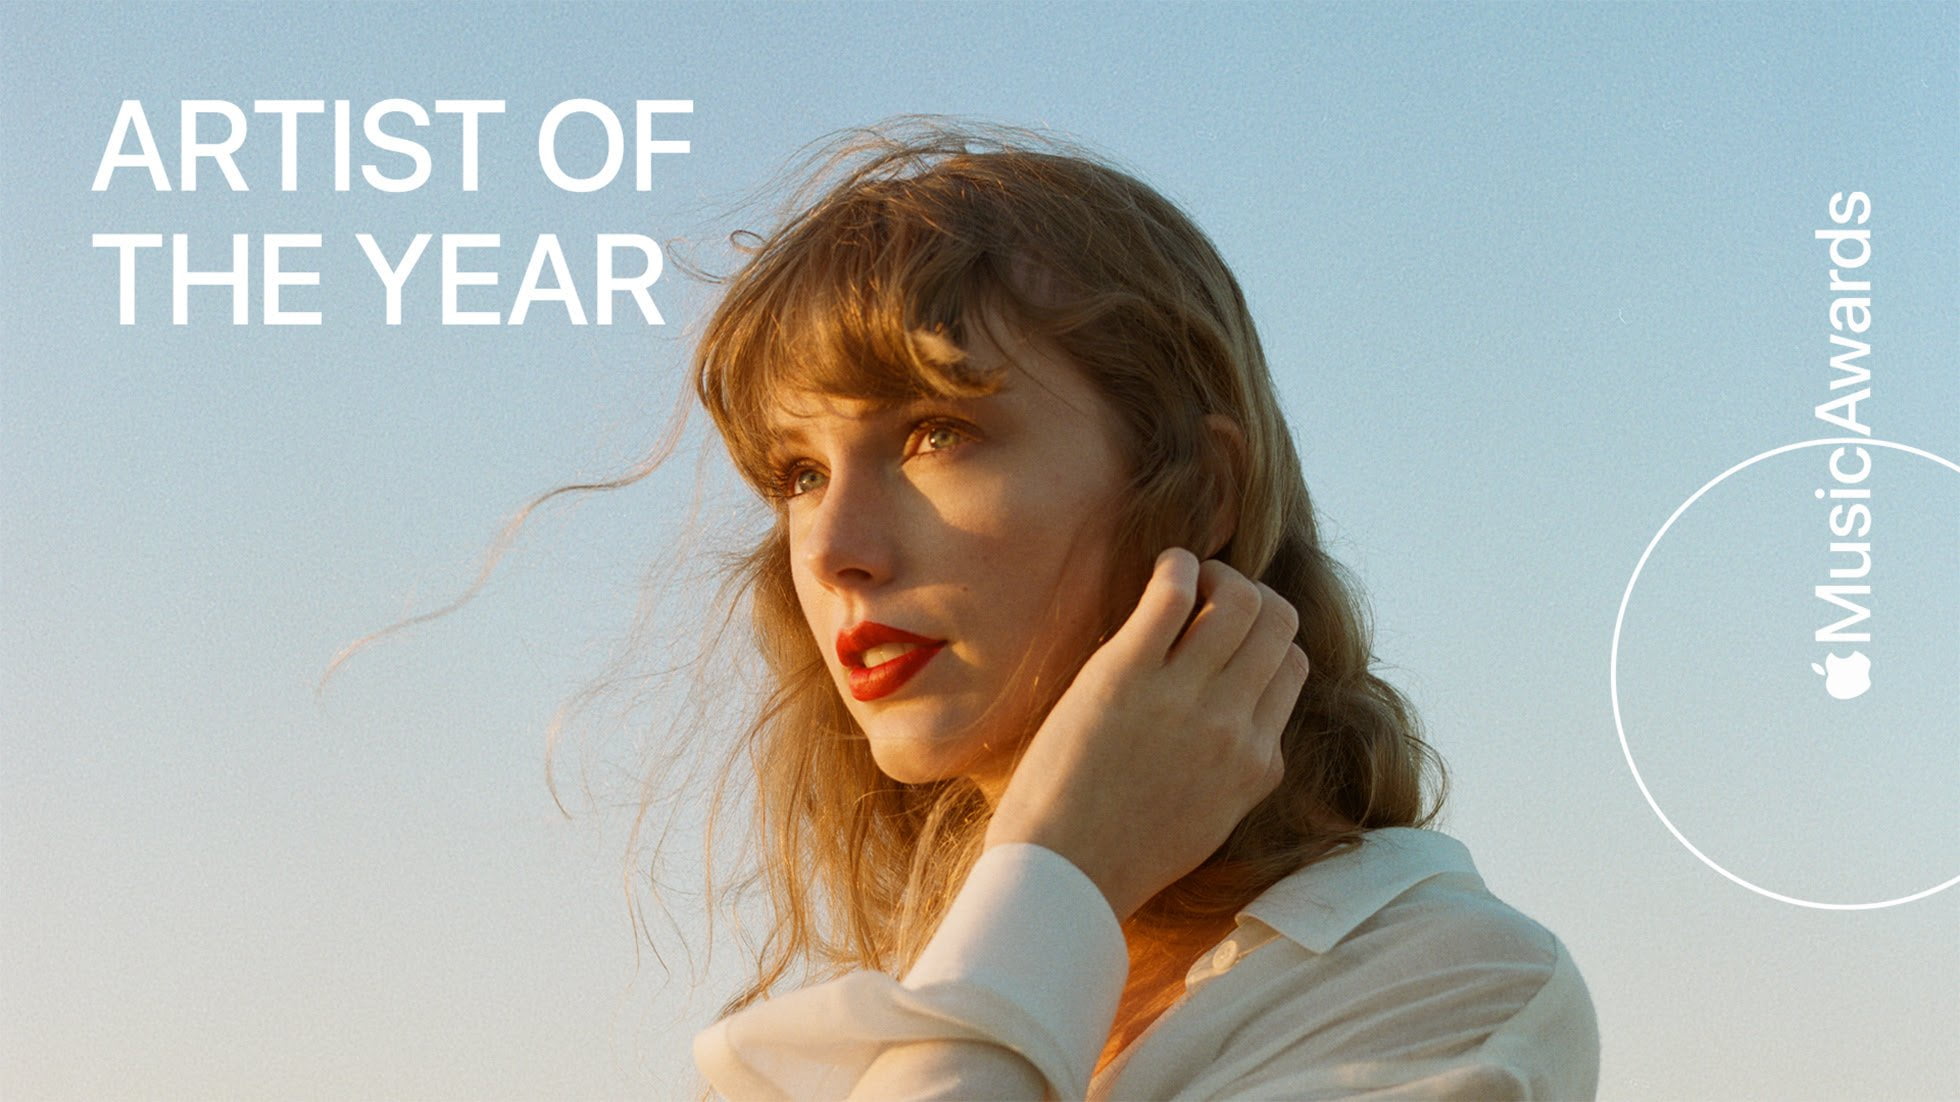 aylor Swift is Apple Music’s Artist of the Year for 2023